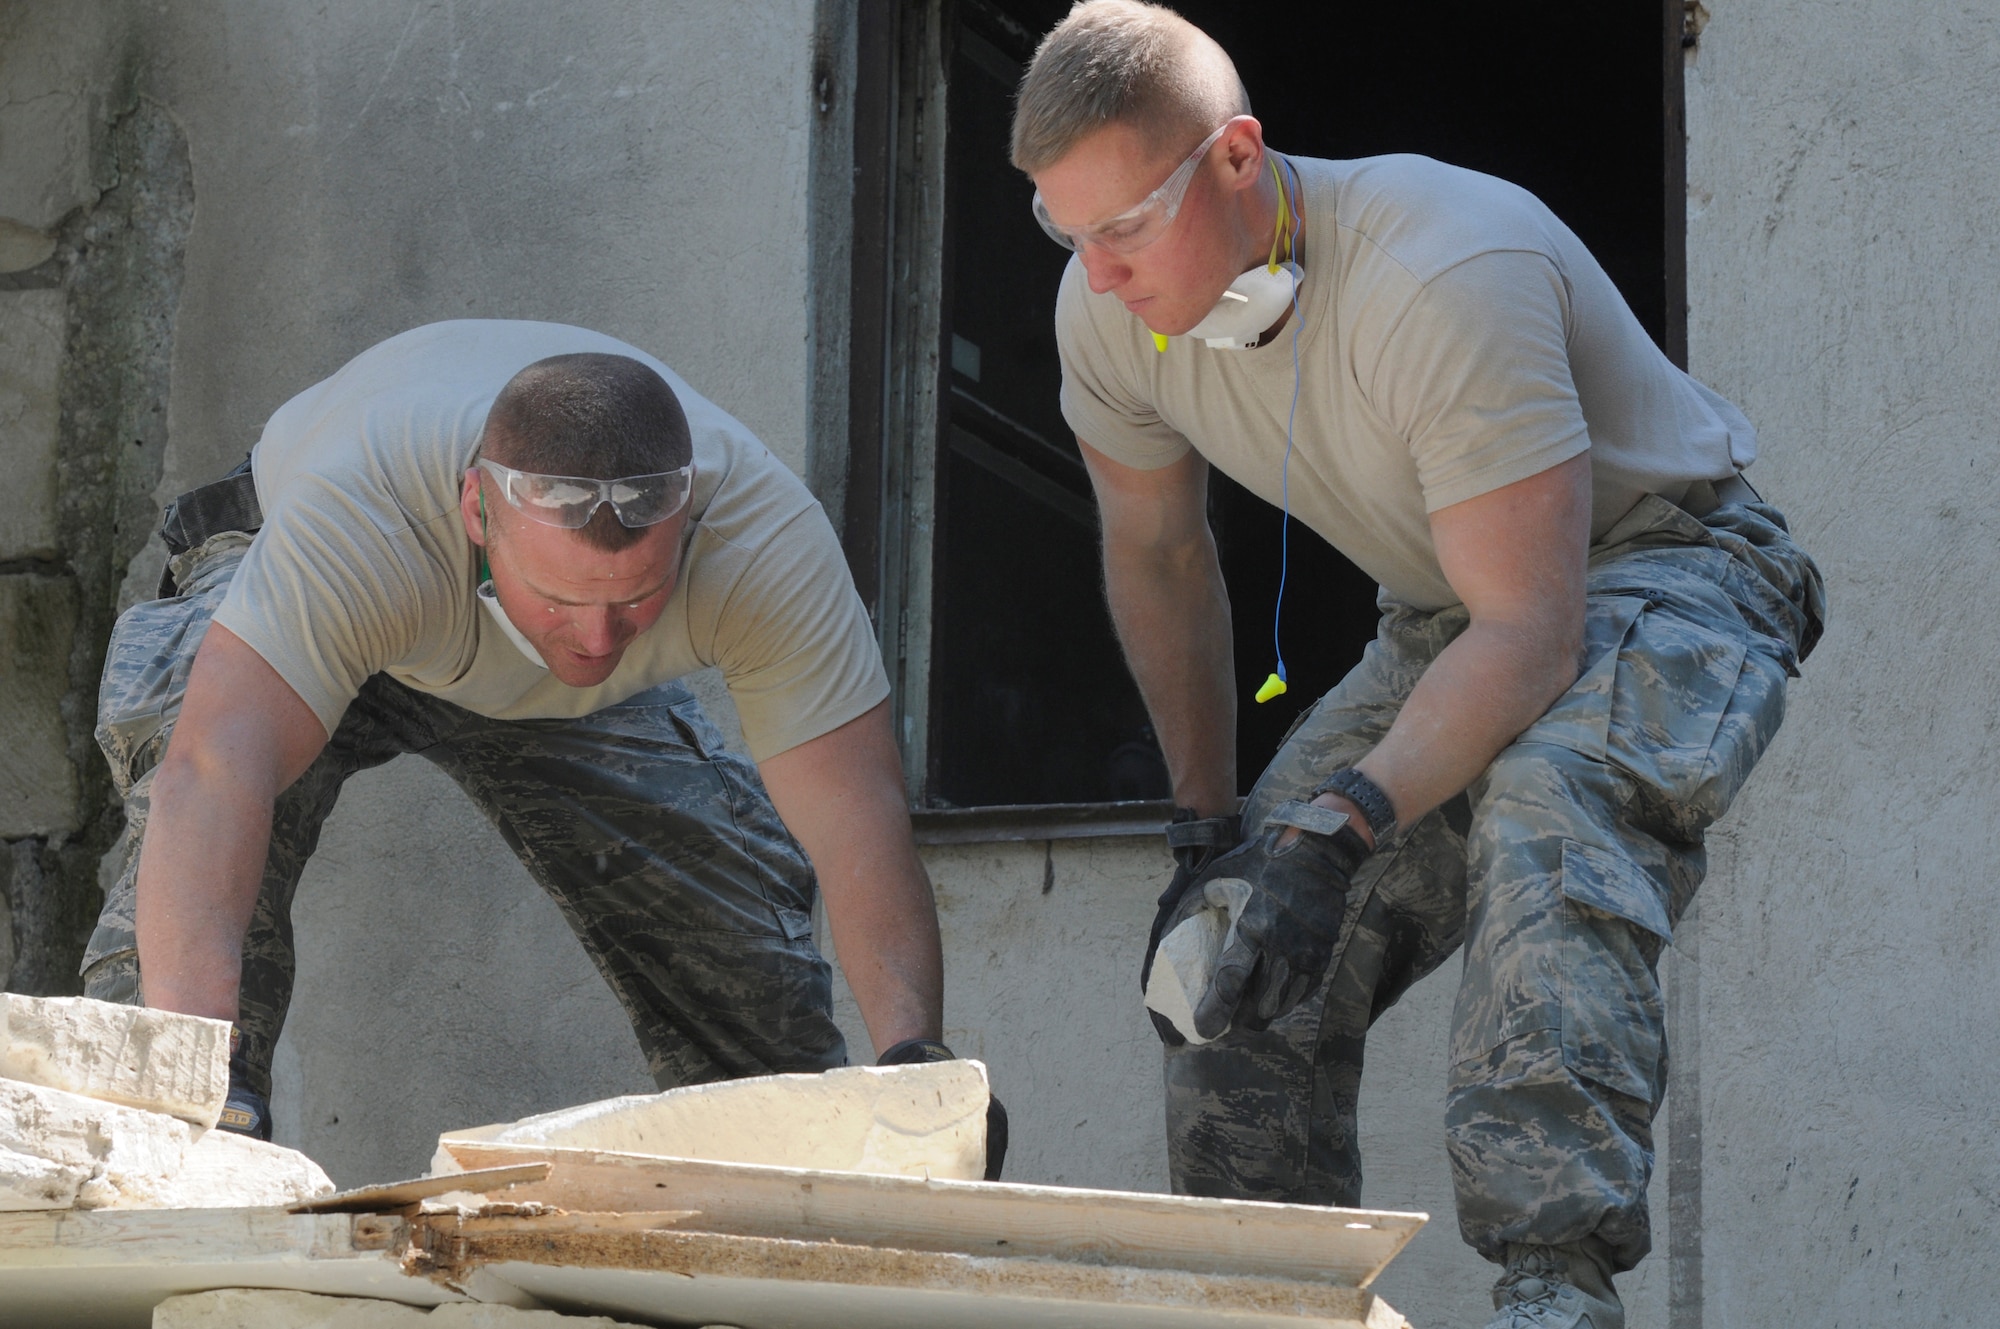 U.S. Air Force Master Sgt. Joshua Thompson and U.S. Air Force Tech. Sgt. Kaleb Henry, both from the Kentucky Air National Guard’s 123rd Civil Engineer Squadron in Louisville, Kentucky, measure a piece of cement to be used in the kitchen at Special School #12 in Chisinau, Moldova, June 5, 2016. More than 35 Airmen from the unit are renovating the institution, which is the only school in Moldova specifically for deaf and special-needs students. The humanitarian project is a partnership with the Office of Defense Cooperation and U.S. European Command, with funds being provided by the National Guard Bureau. (U.S. Air National Guard photo by Tech. Sgt. Vicky Spesard)